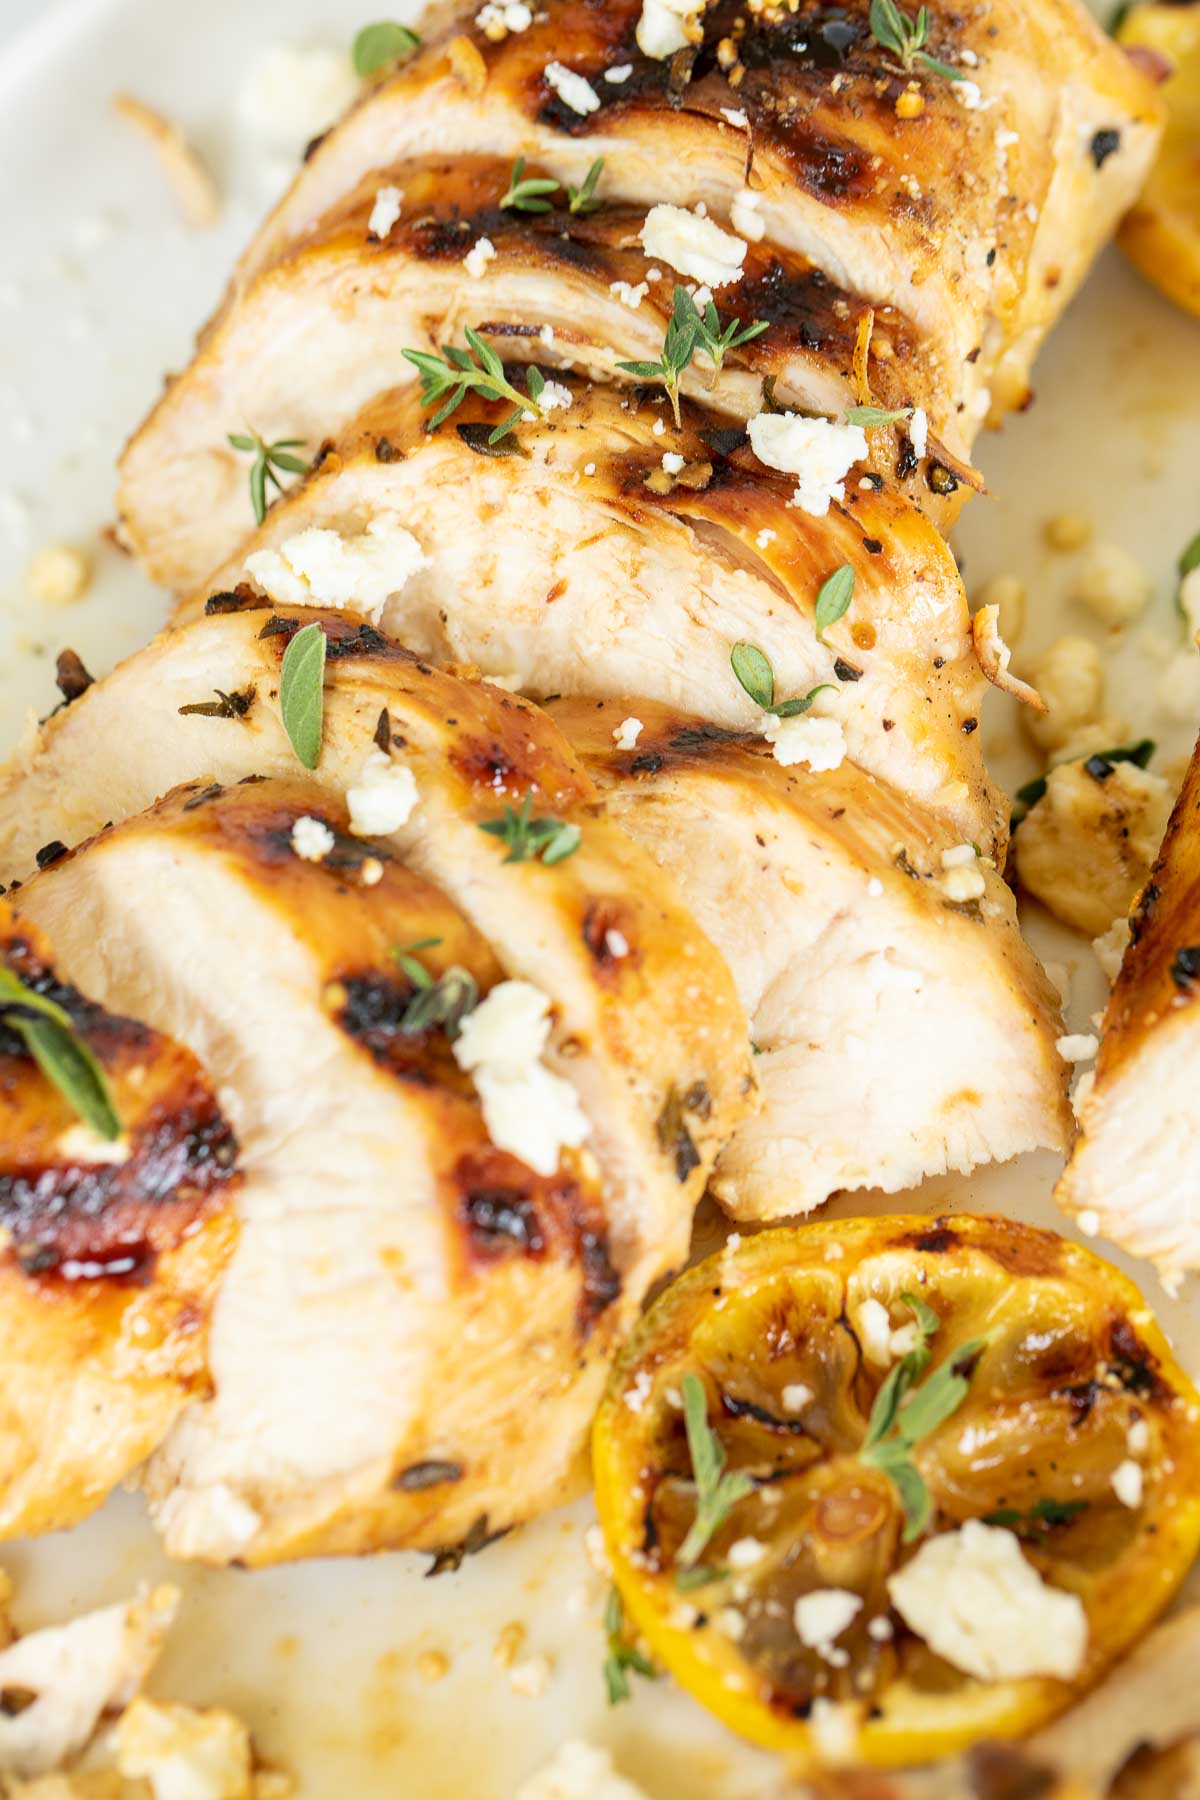 Slices of Greek marinated chicken on a white surface, grilled lemon to the side.